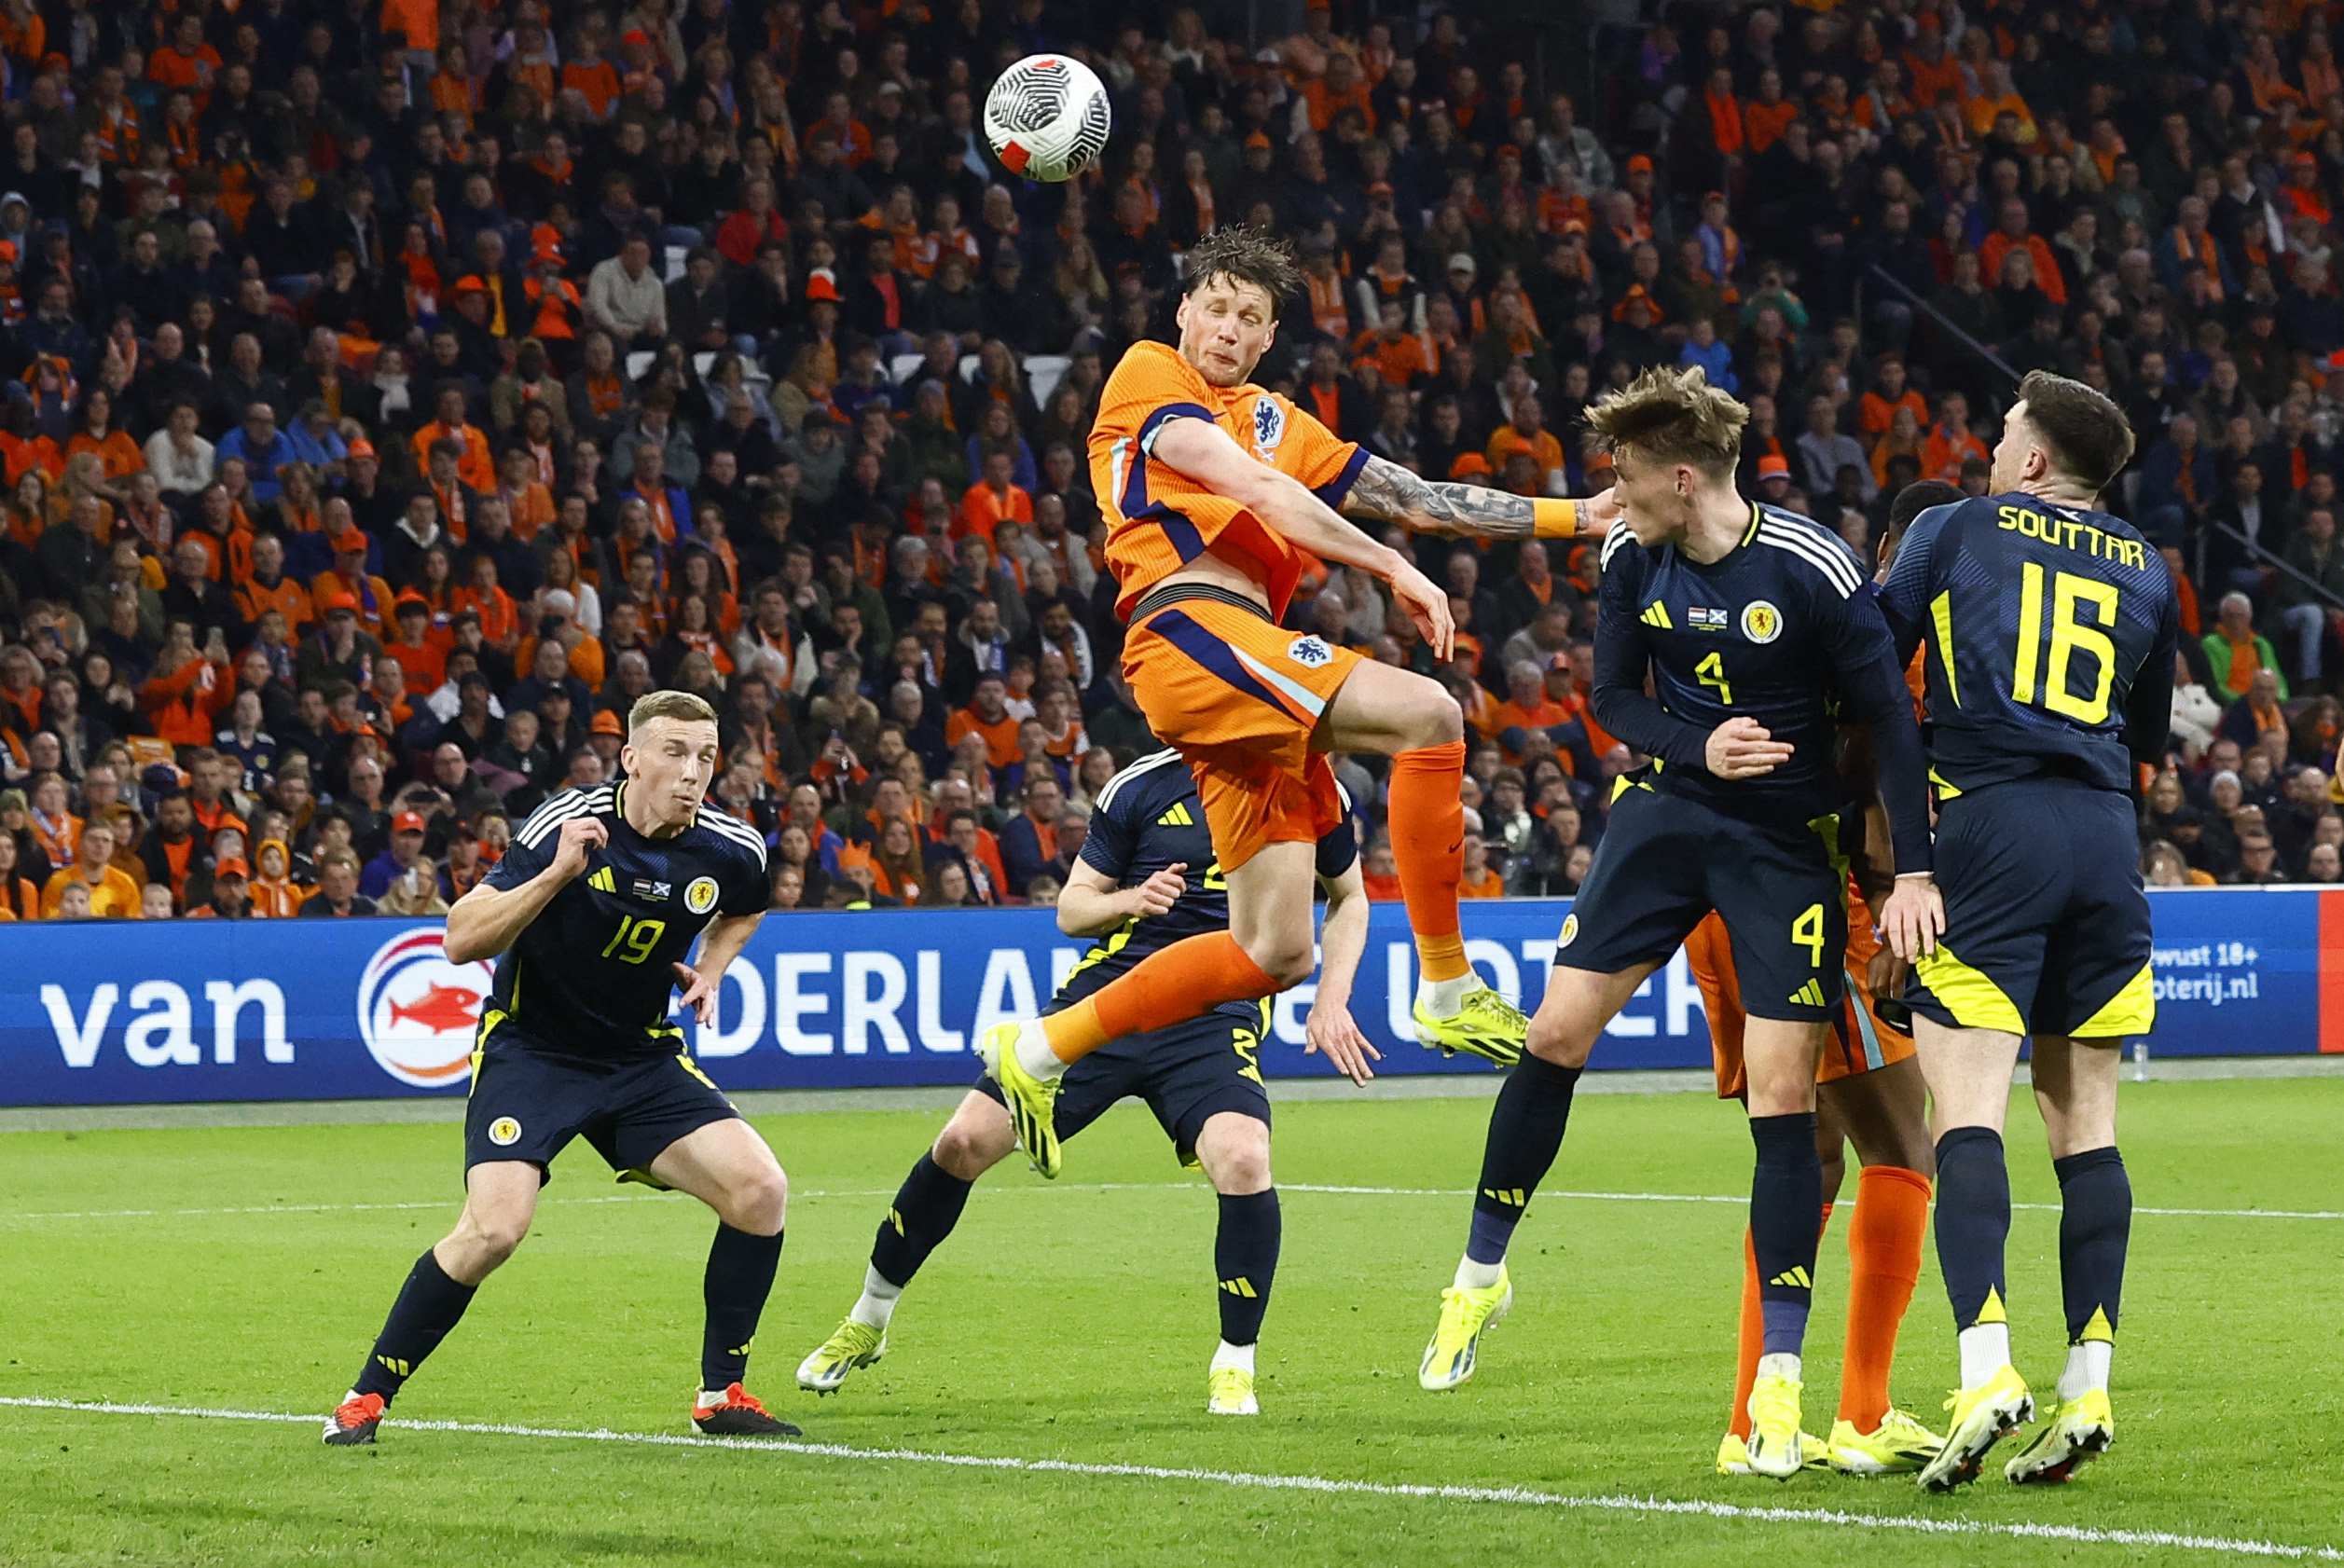 Sluggish start no bother for Dutch as they beat Scotland 4-0 | Reuters